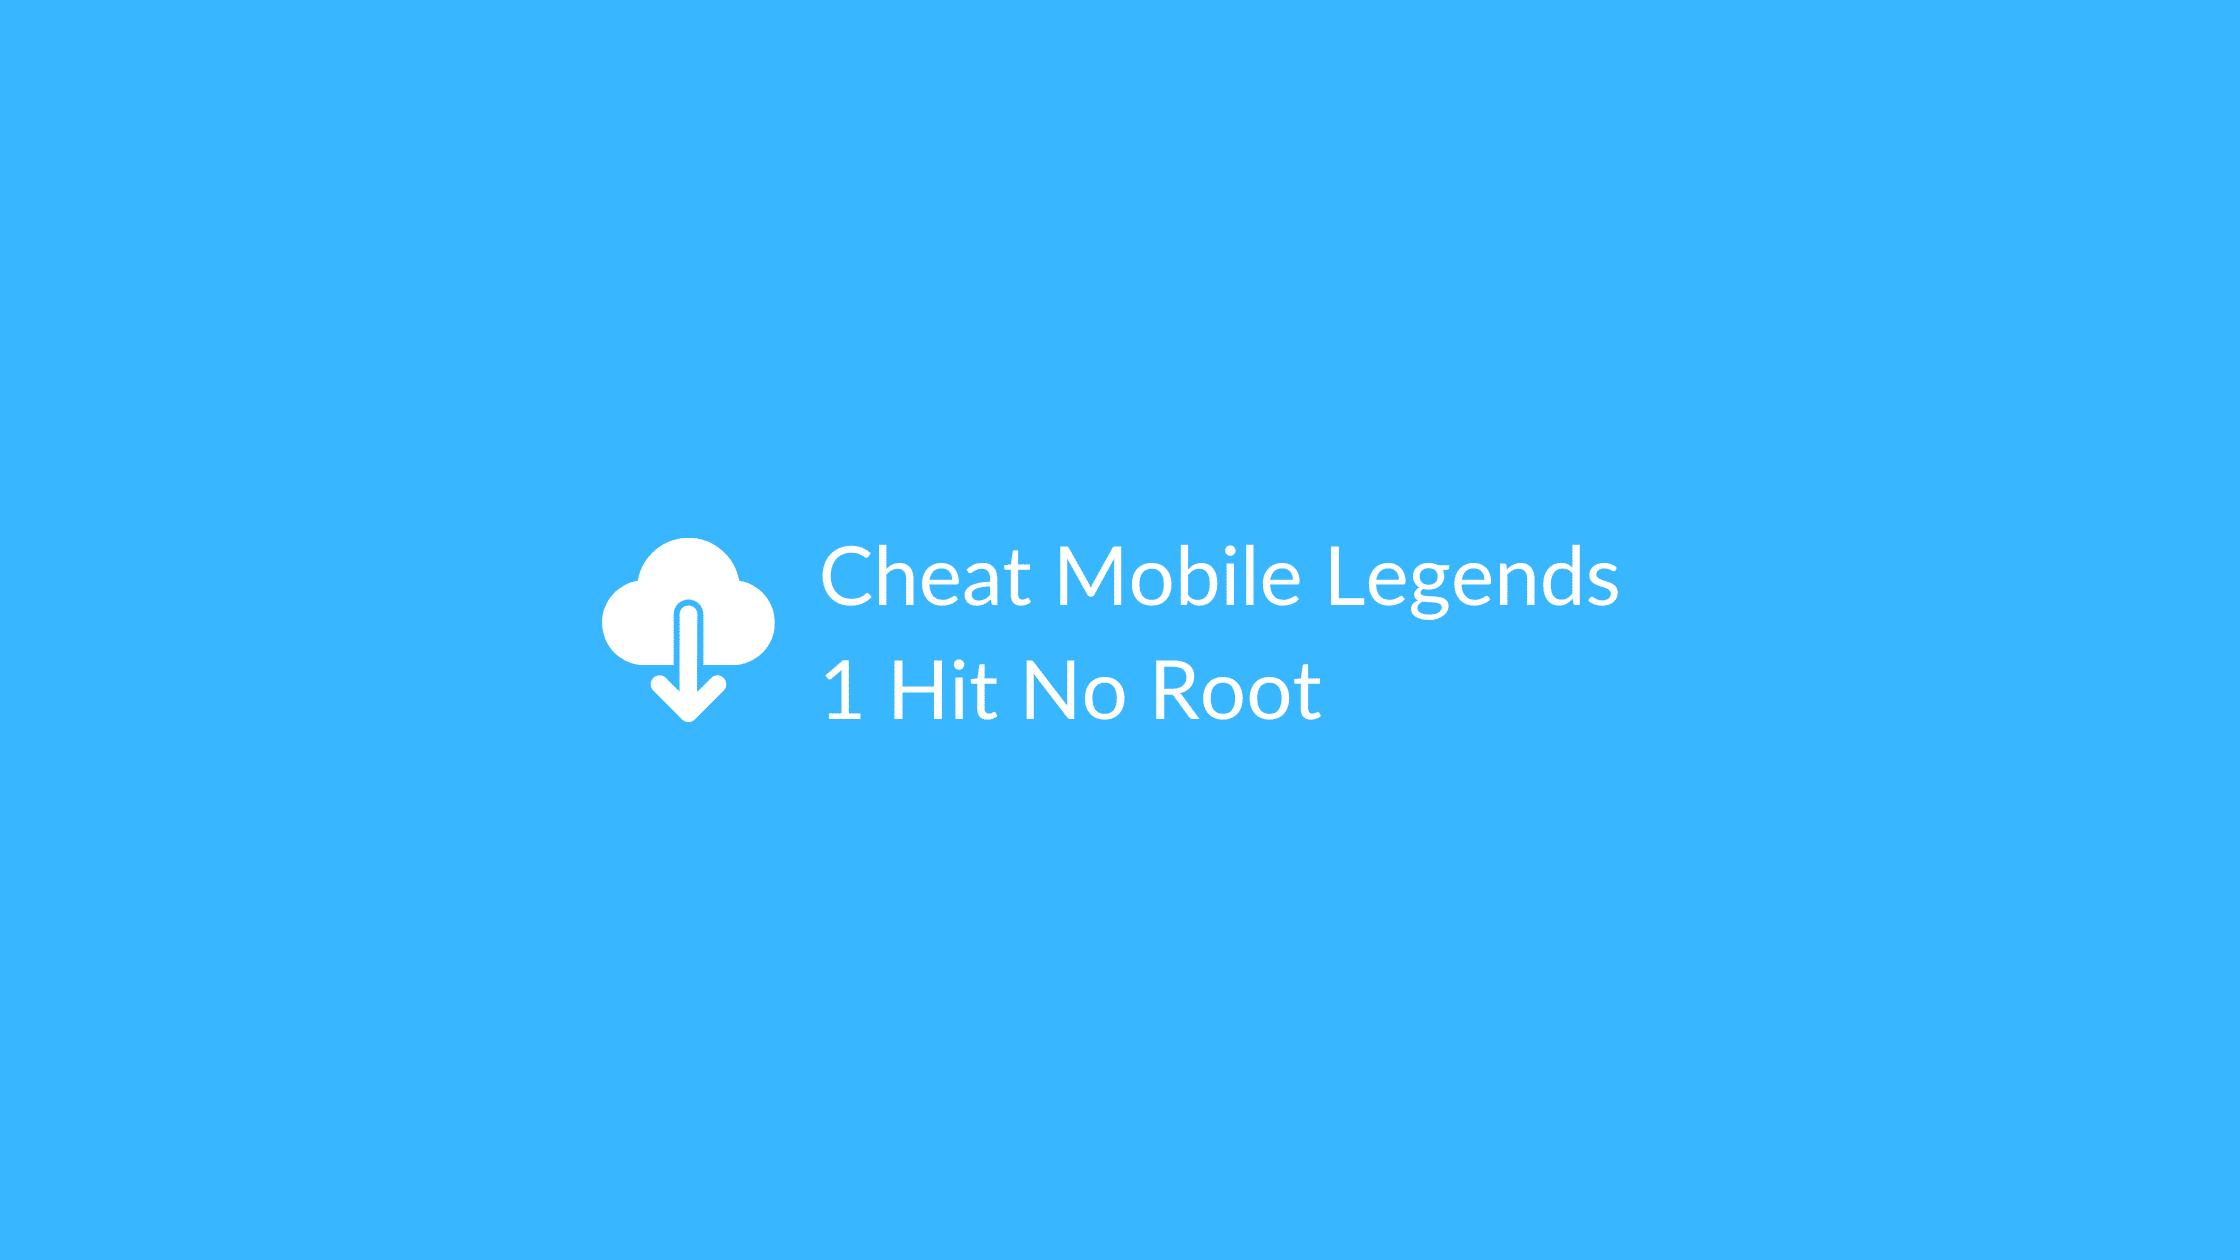 Cheat Mobile Legends 1 Hit No Root